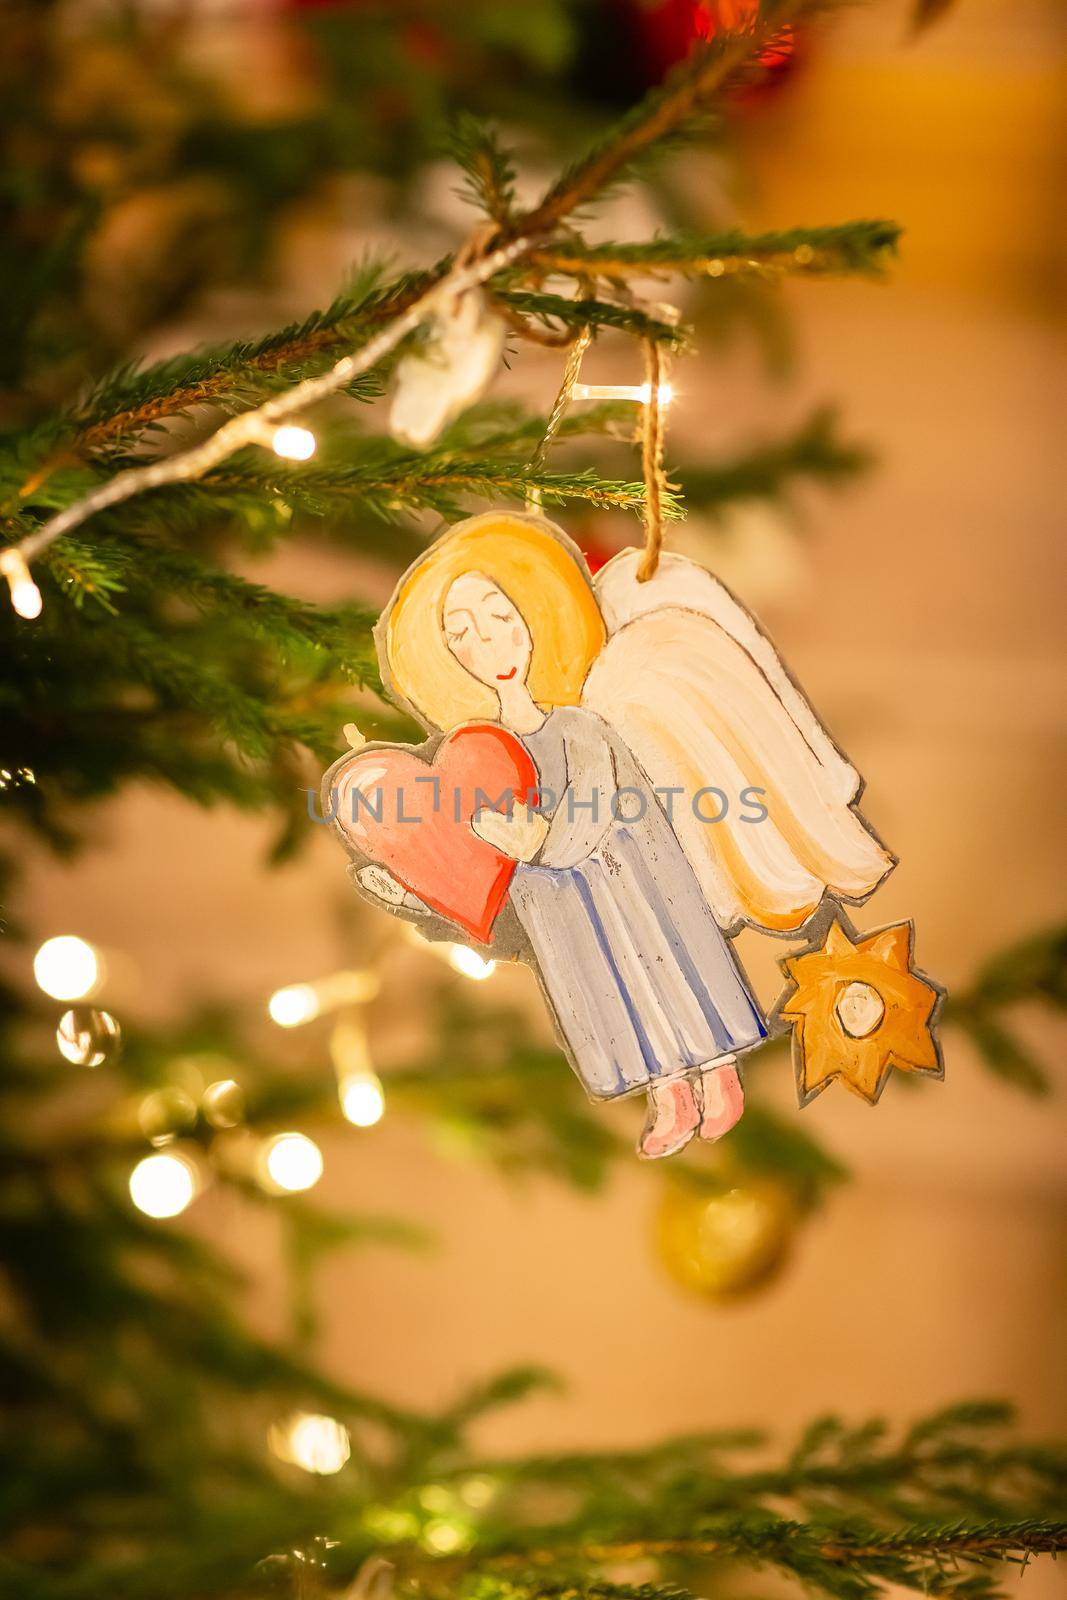 Decorated Christmas tree, angel in Orthodox church on Christmas eve. Religious Christmas celebration concept